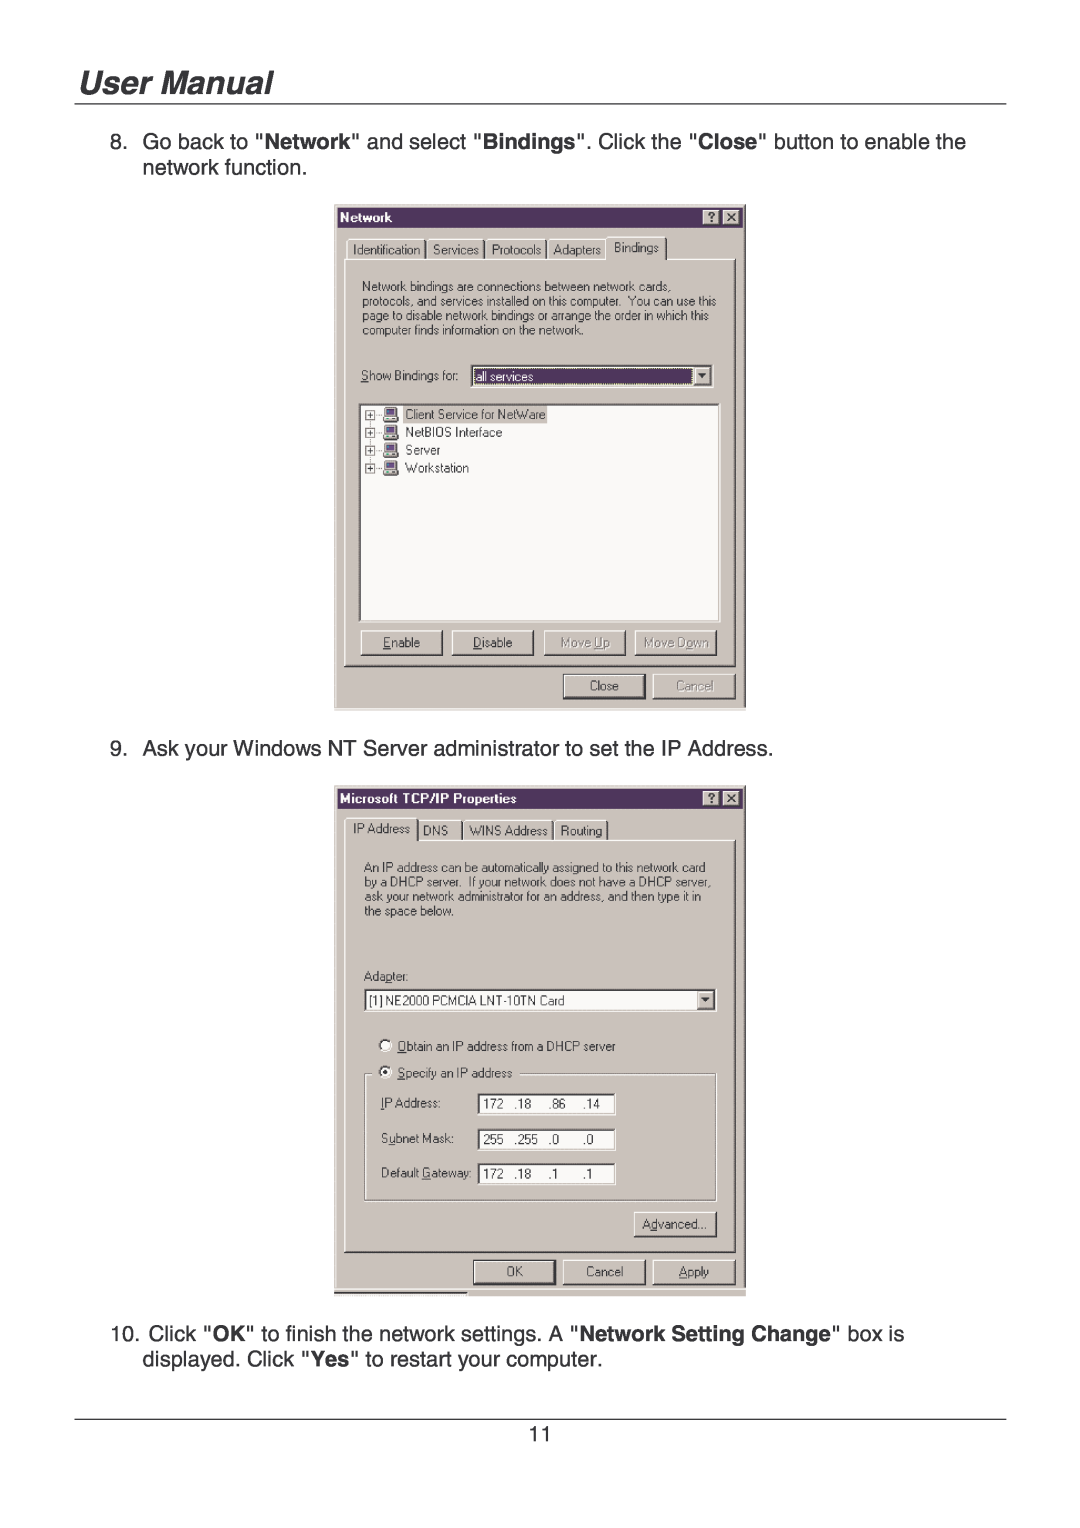 Lindy 70928 user manual User Manual, Ask your Windows NT Server administrator to set the IP Address 